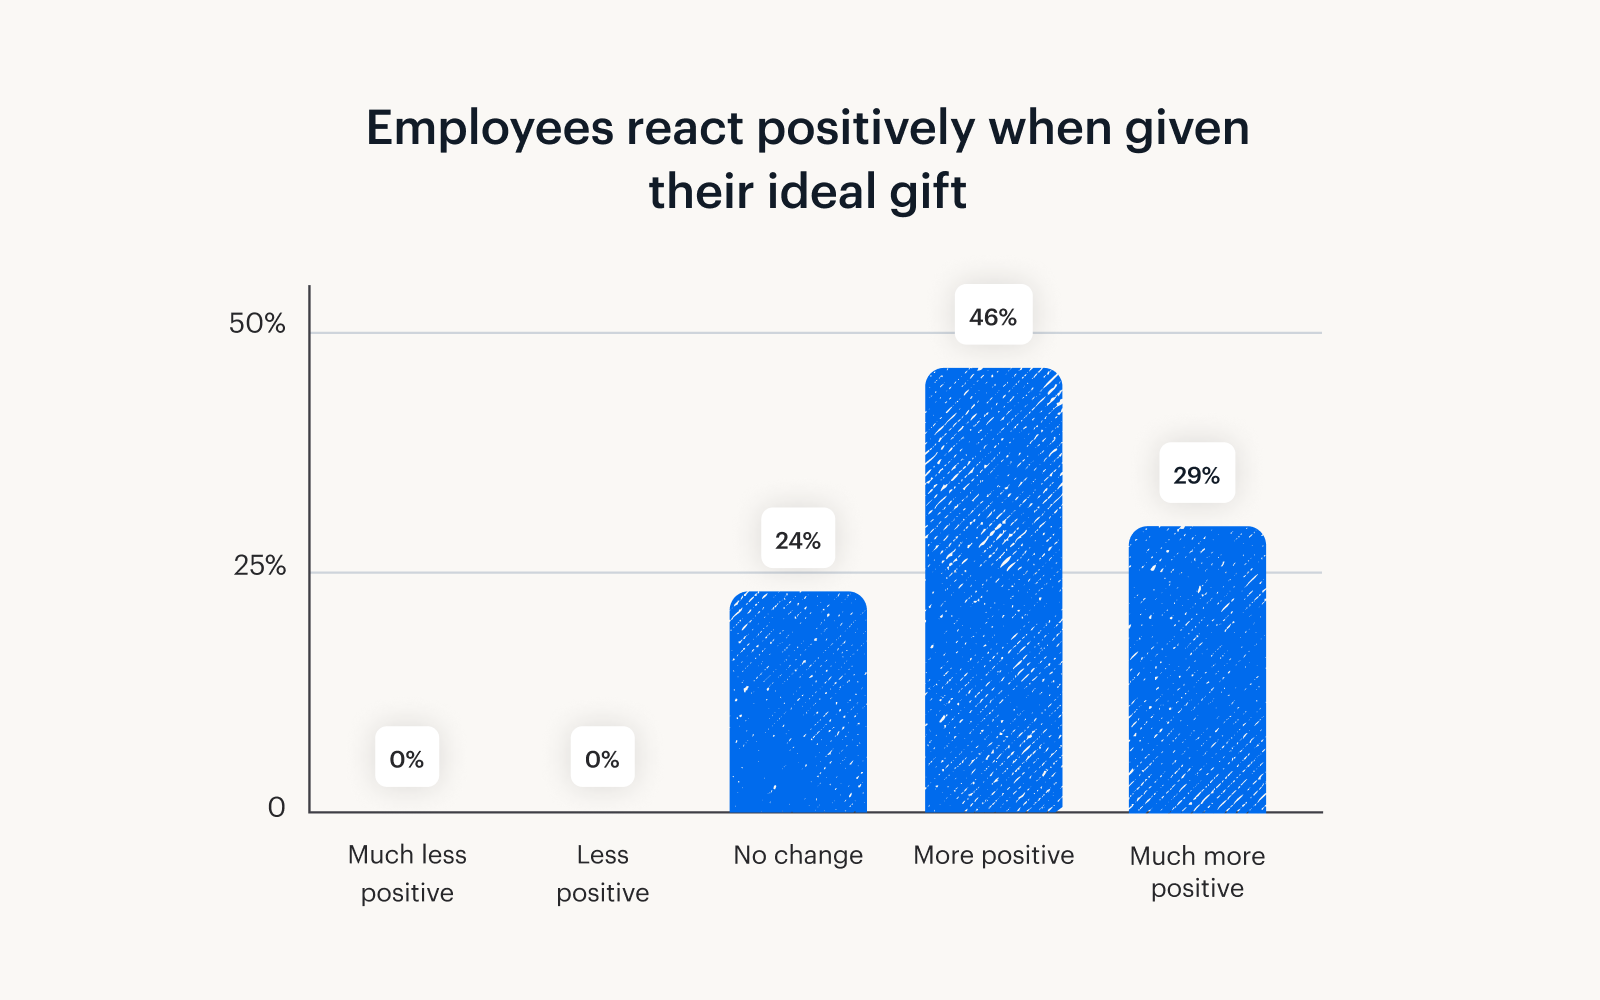 A bar graph showing that employees react positively when given their ideal holiday gift.